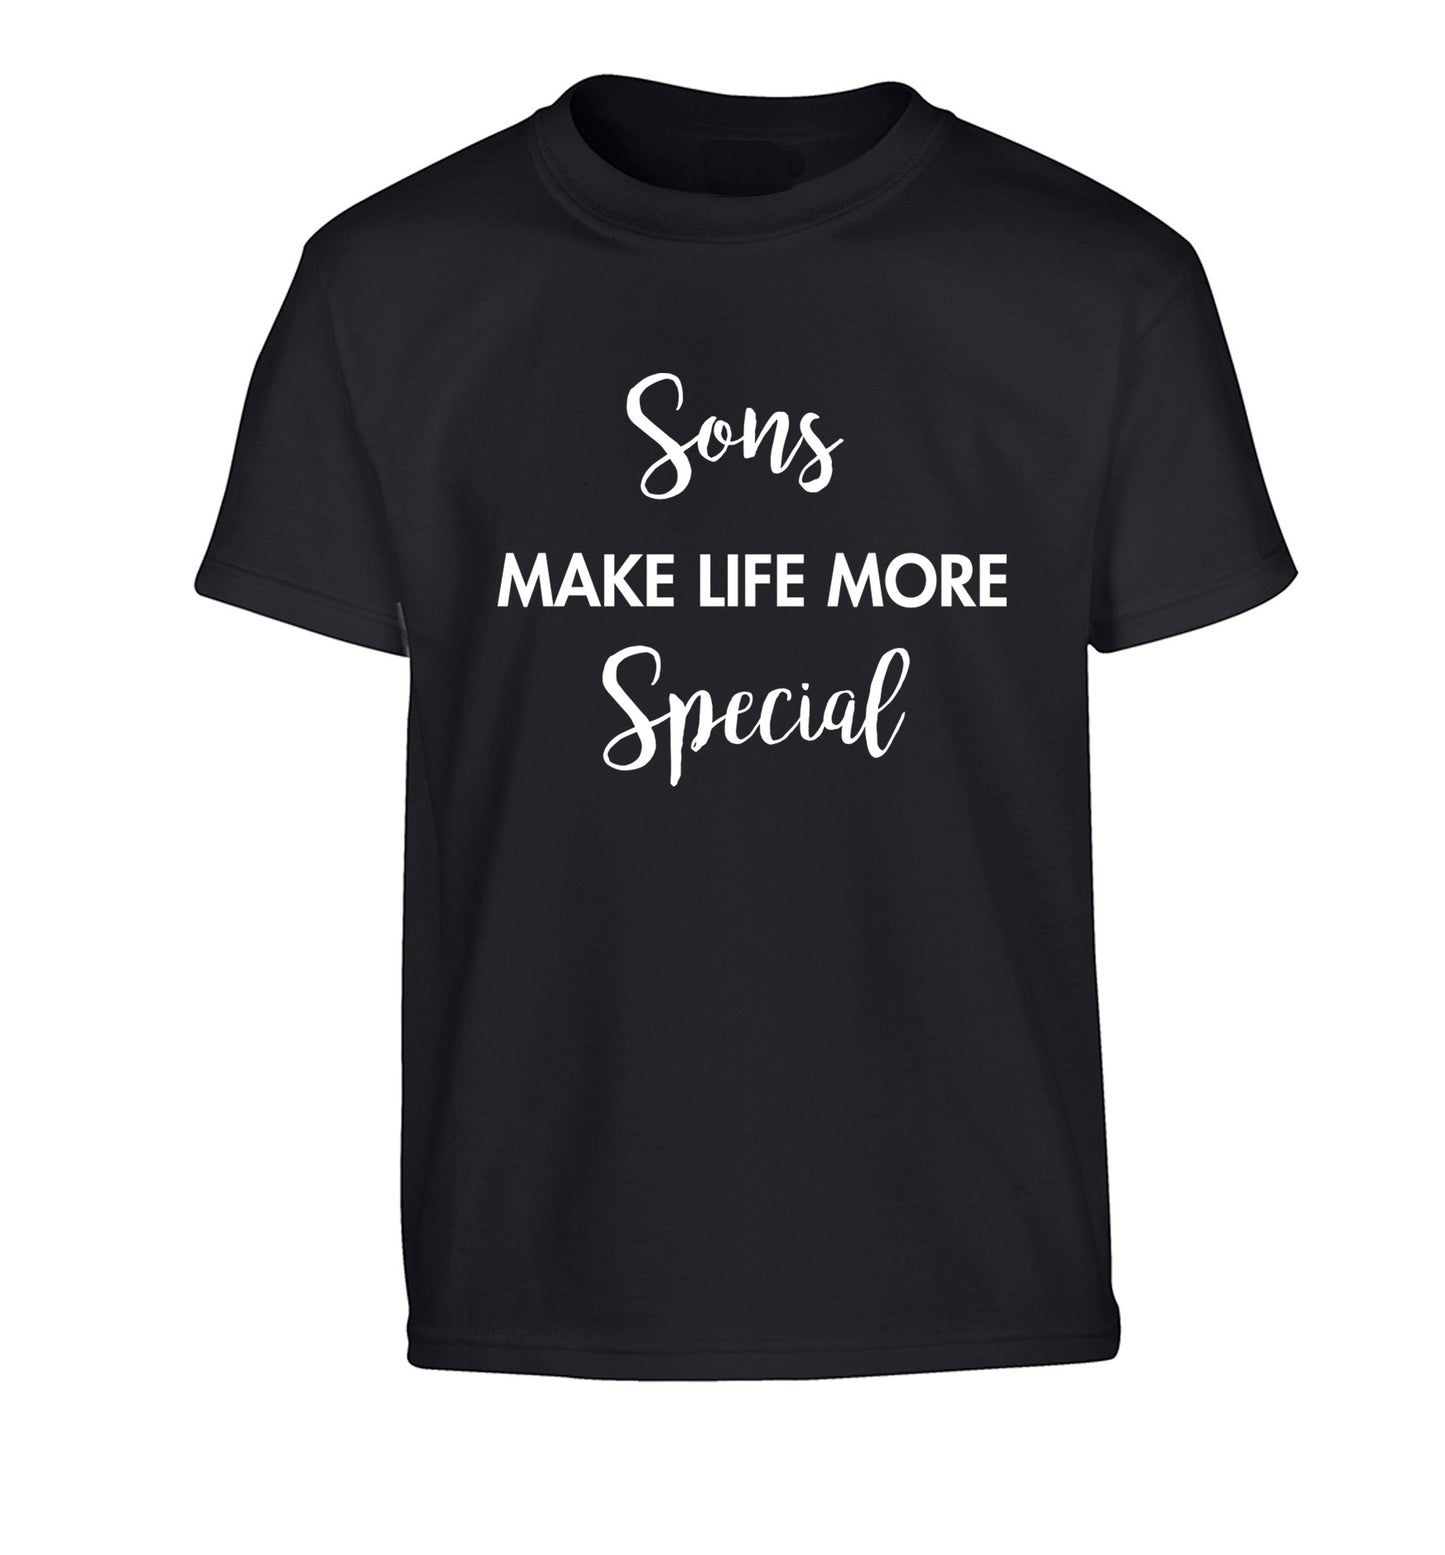 Daughters make life more special Children's black Tshirt 12-14 Years